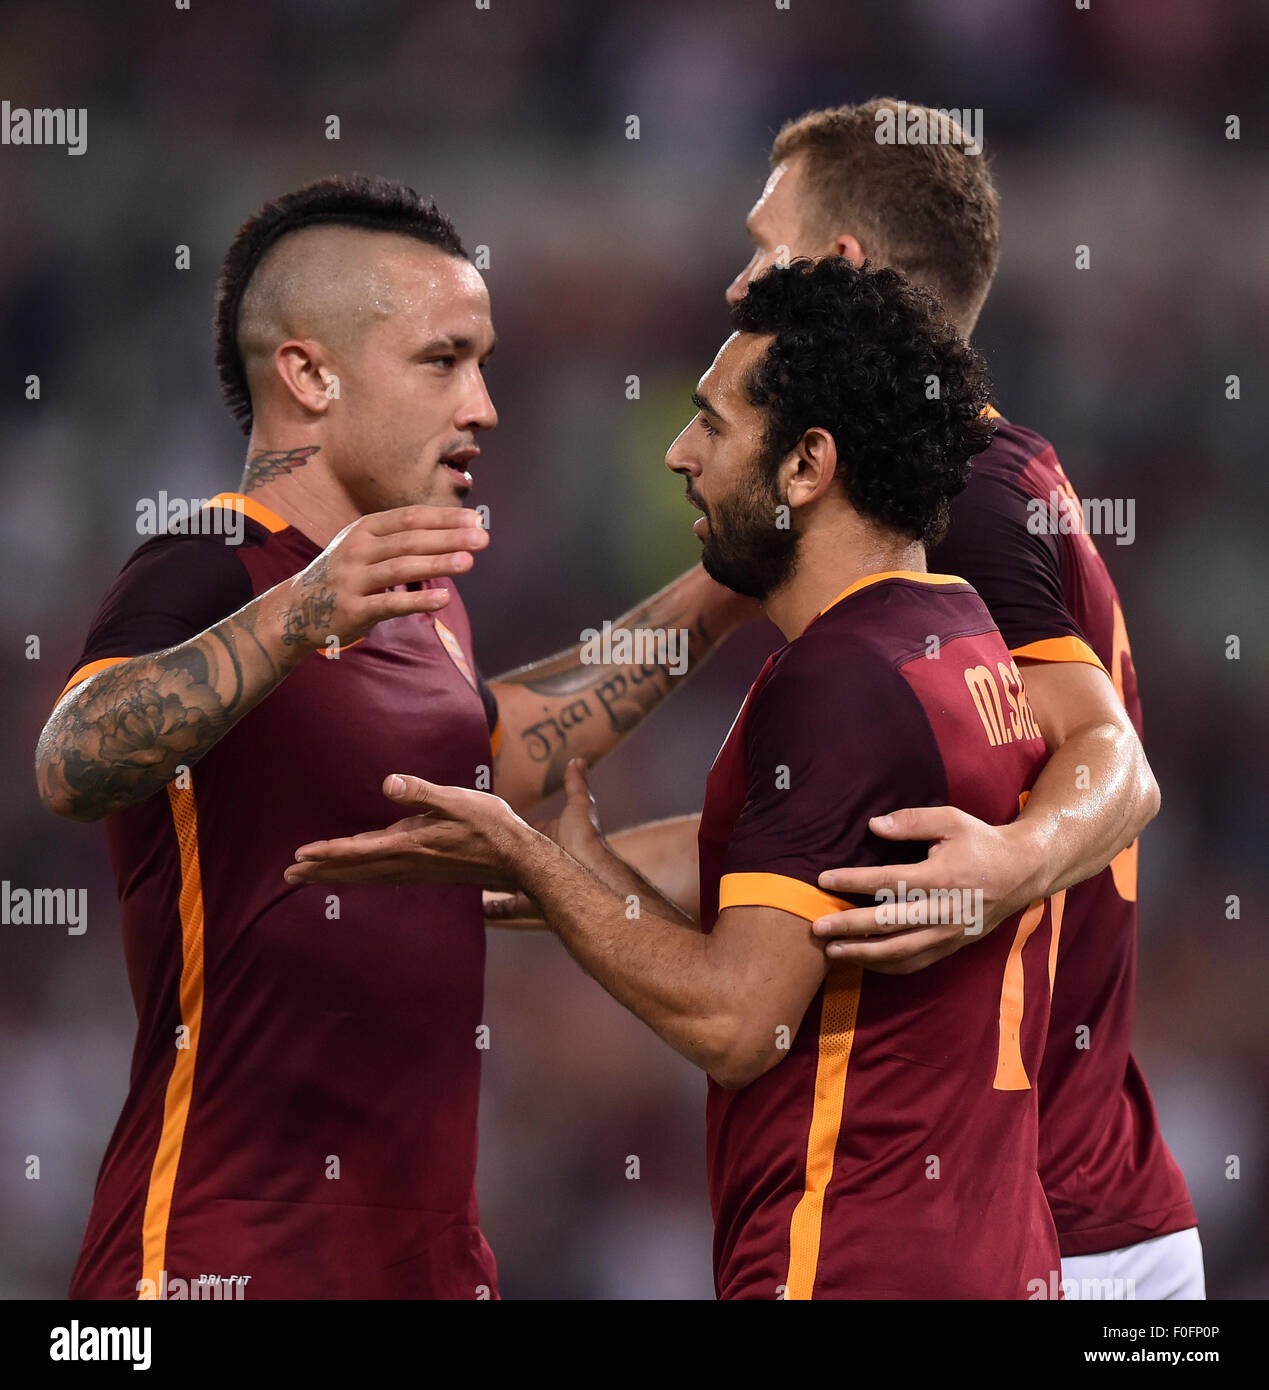 Rome, Italy. 14th Aug, 2015. Salah (C) of AS Roma celebrates his goal during a friendly match against Sevilla in Rome, Italy, on Aug. 14, 2015. AS Roma won 6-4. Credit:  Alberto Lingria/Xinhua/Alamy Live News Stock Photo